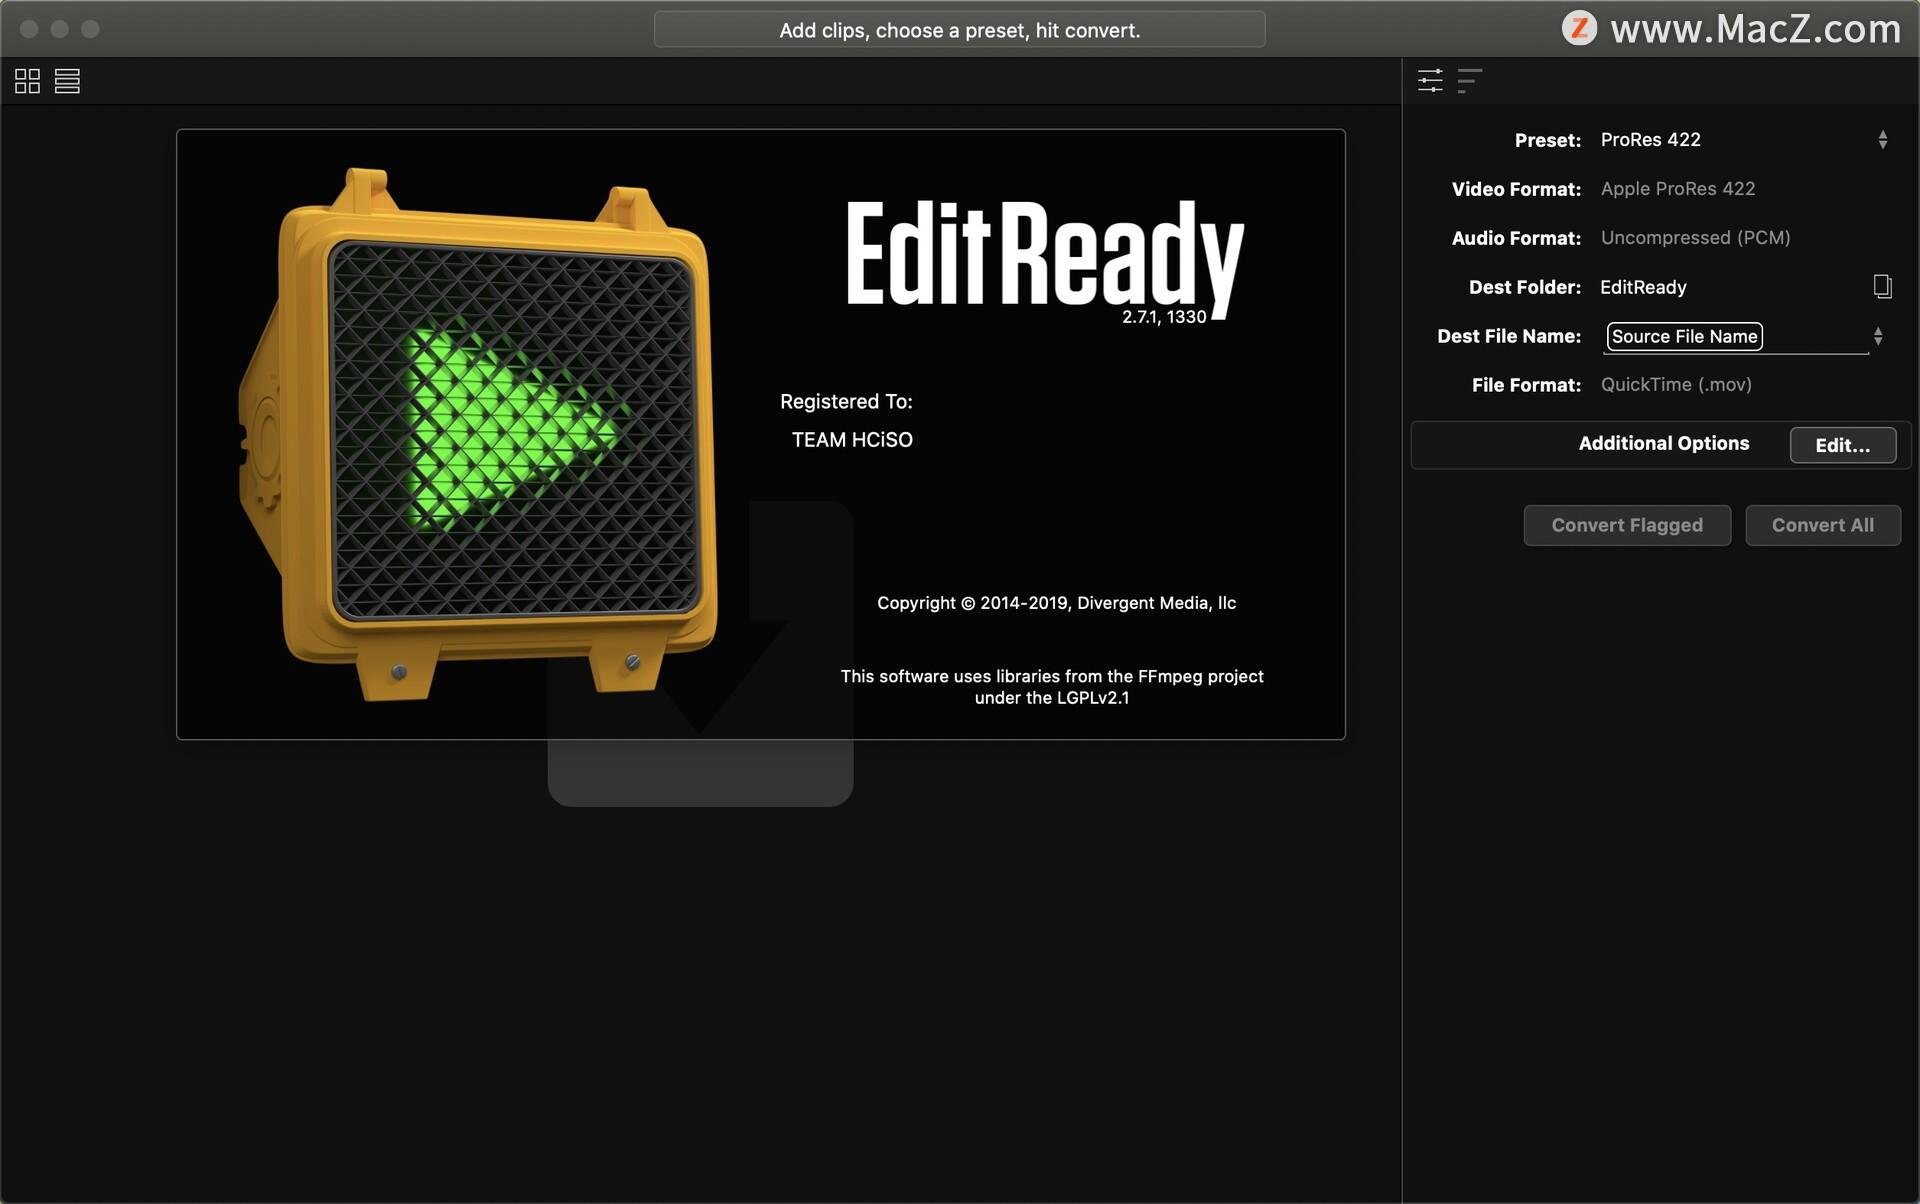 can you run editready and avid at the same time